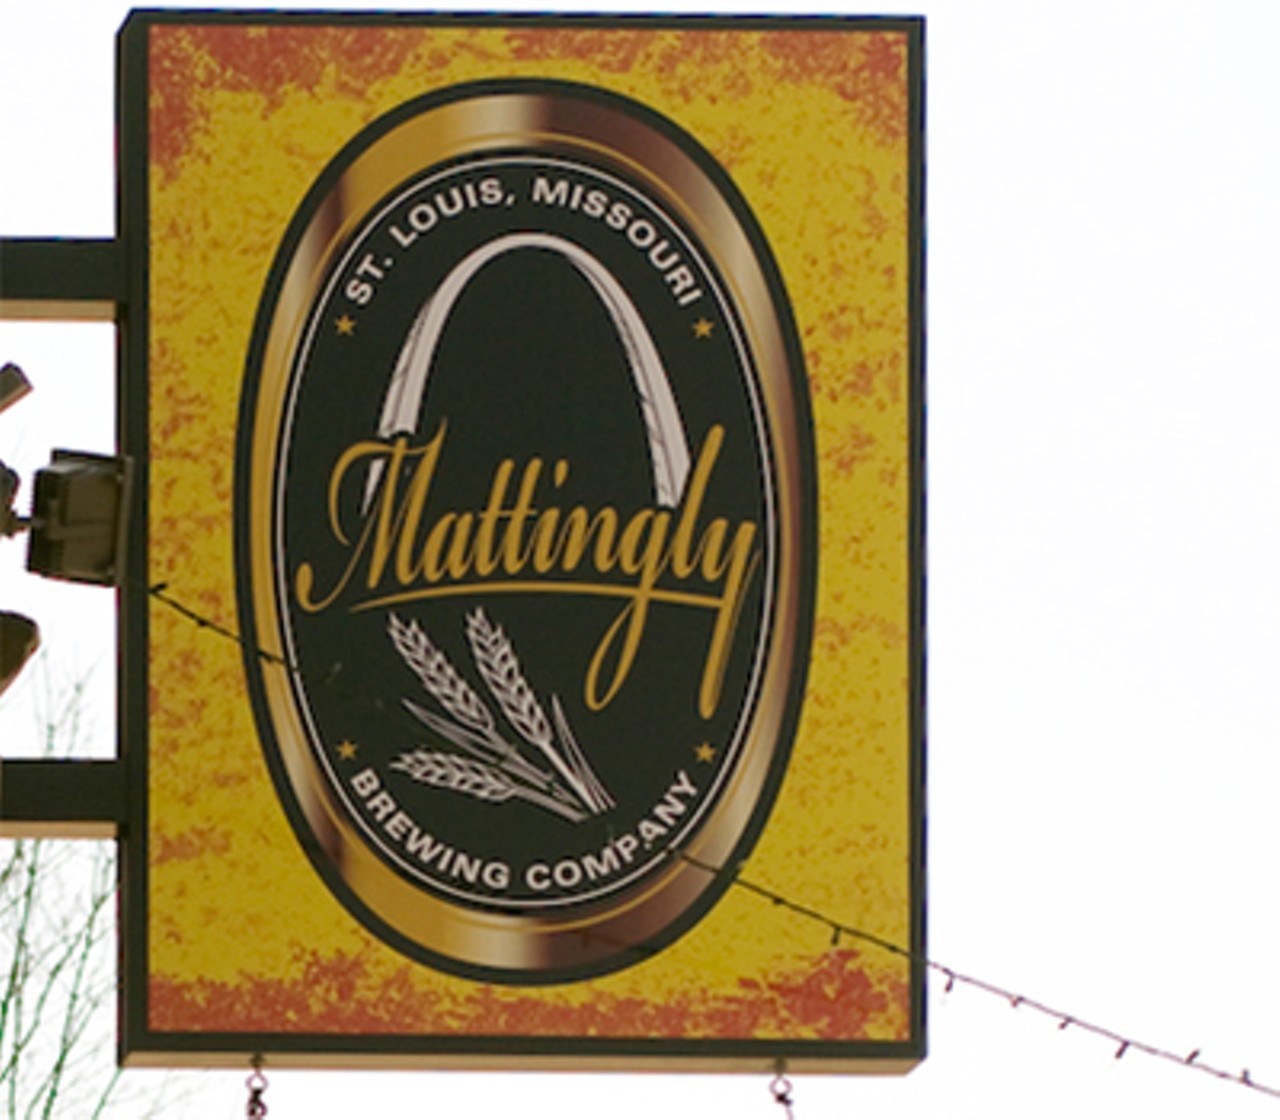 Mattingly Brewing Company, 3000 S. Jefferson Street in the Benton Park neighborhood.Read "Tap City: How to approach Mattingly Brewing Company? Go for the beer. Stay for the beer." by Ian Froeb.